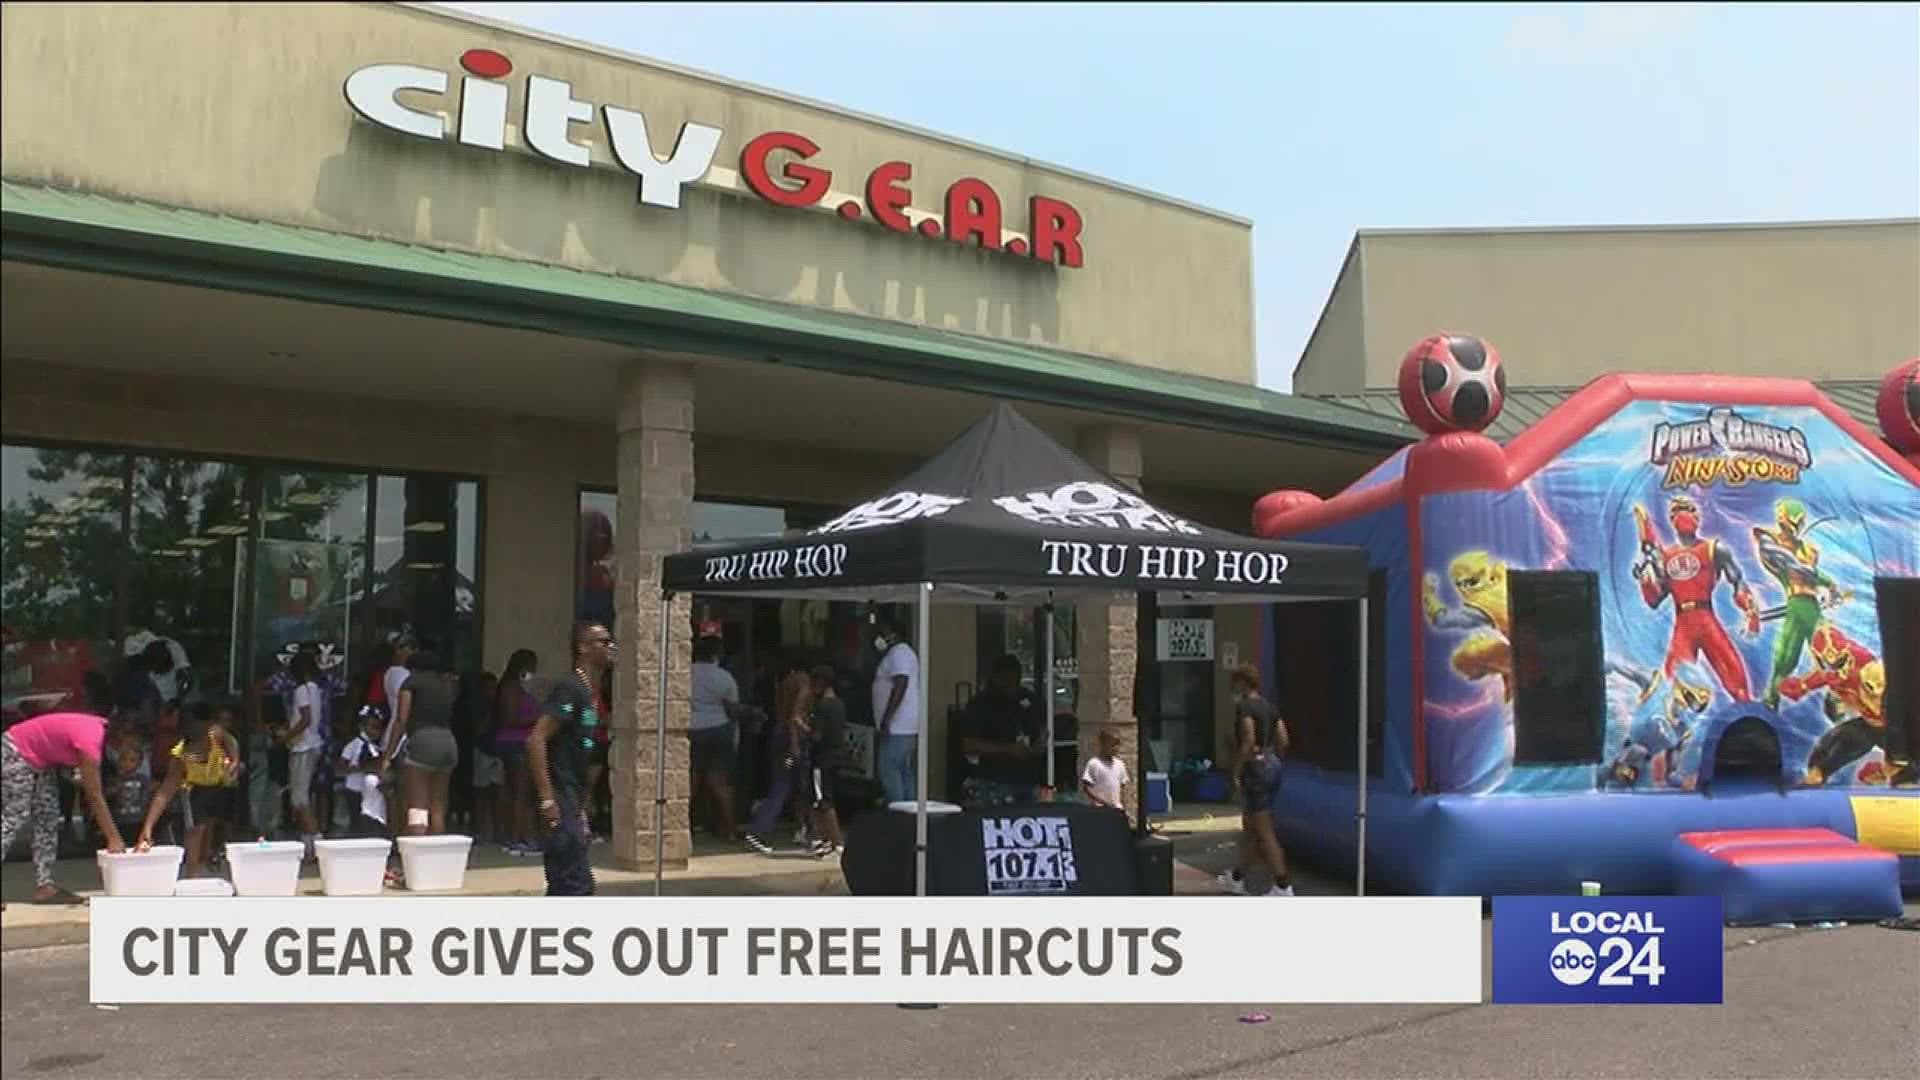 City Gear gave out free backpacks, school supplies, and haircuts.